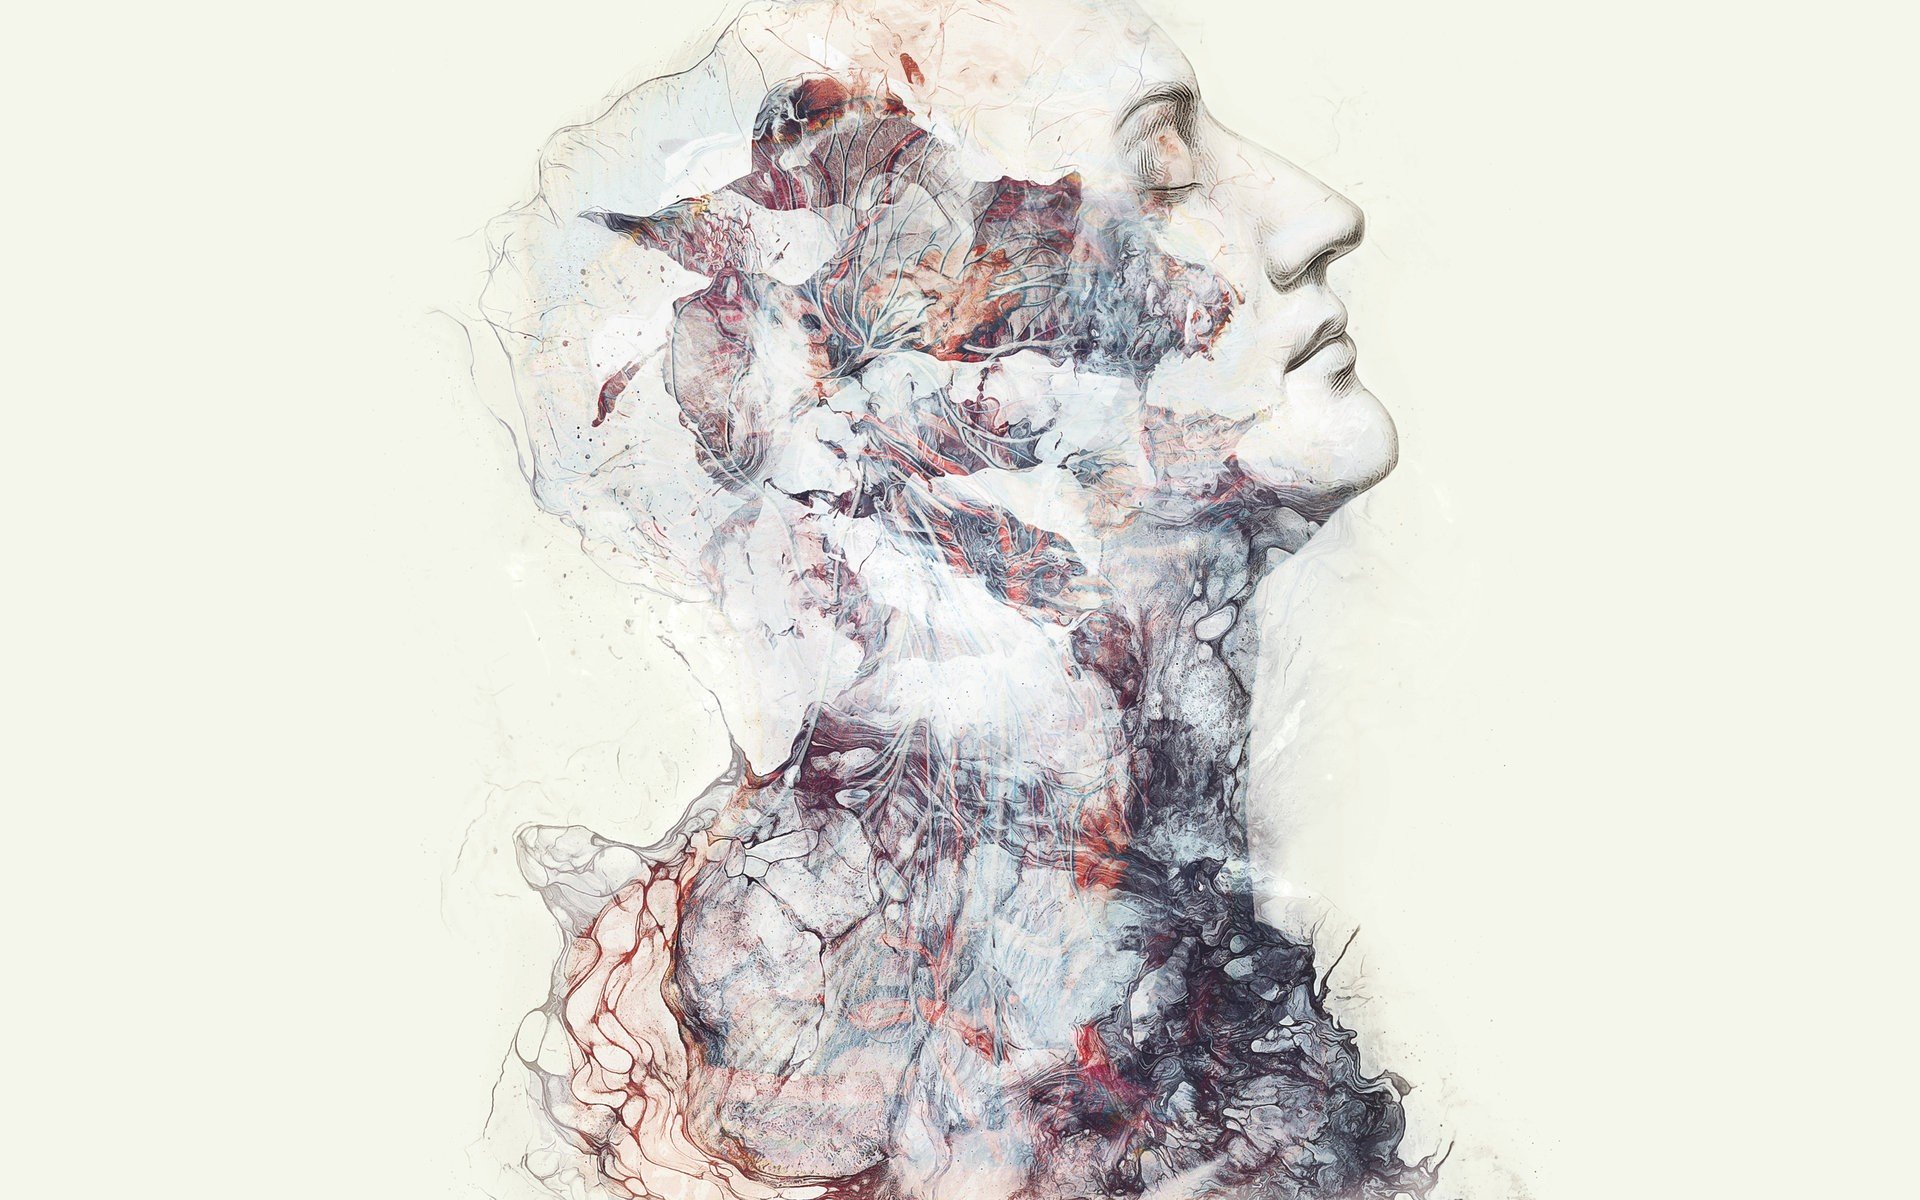 Person, Face, Profile, Closed eyes, Album covers, Drawn, Abstract Wallpaper